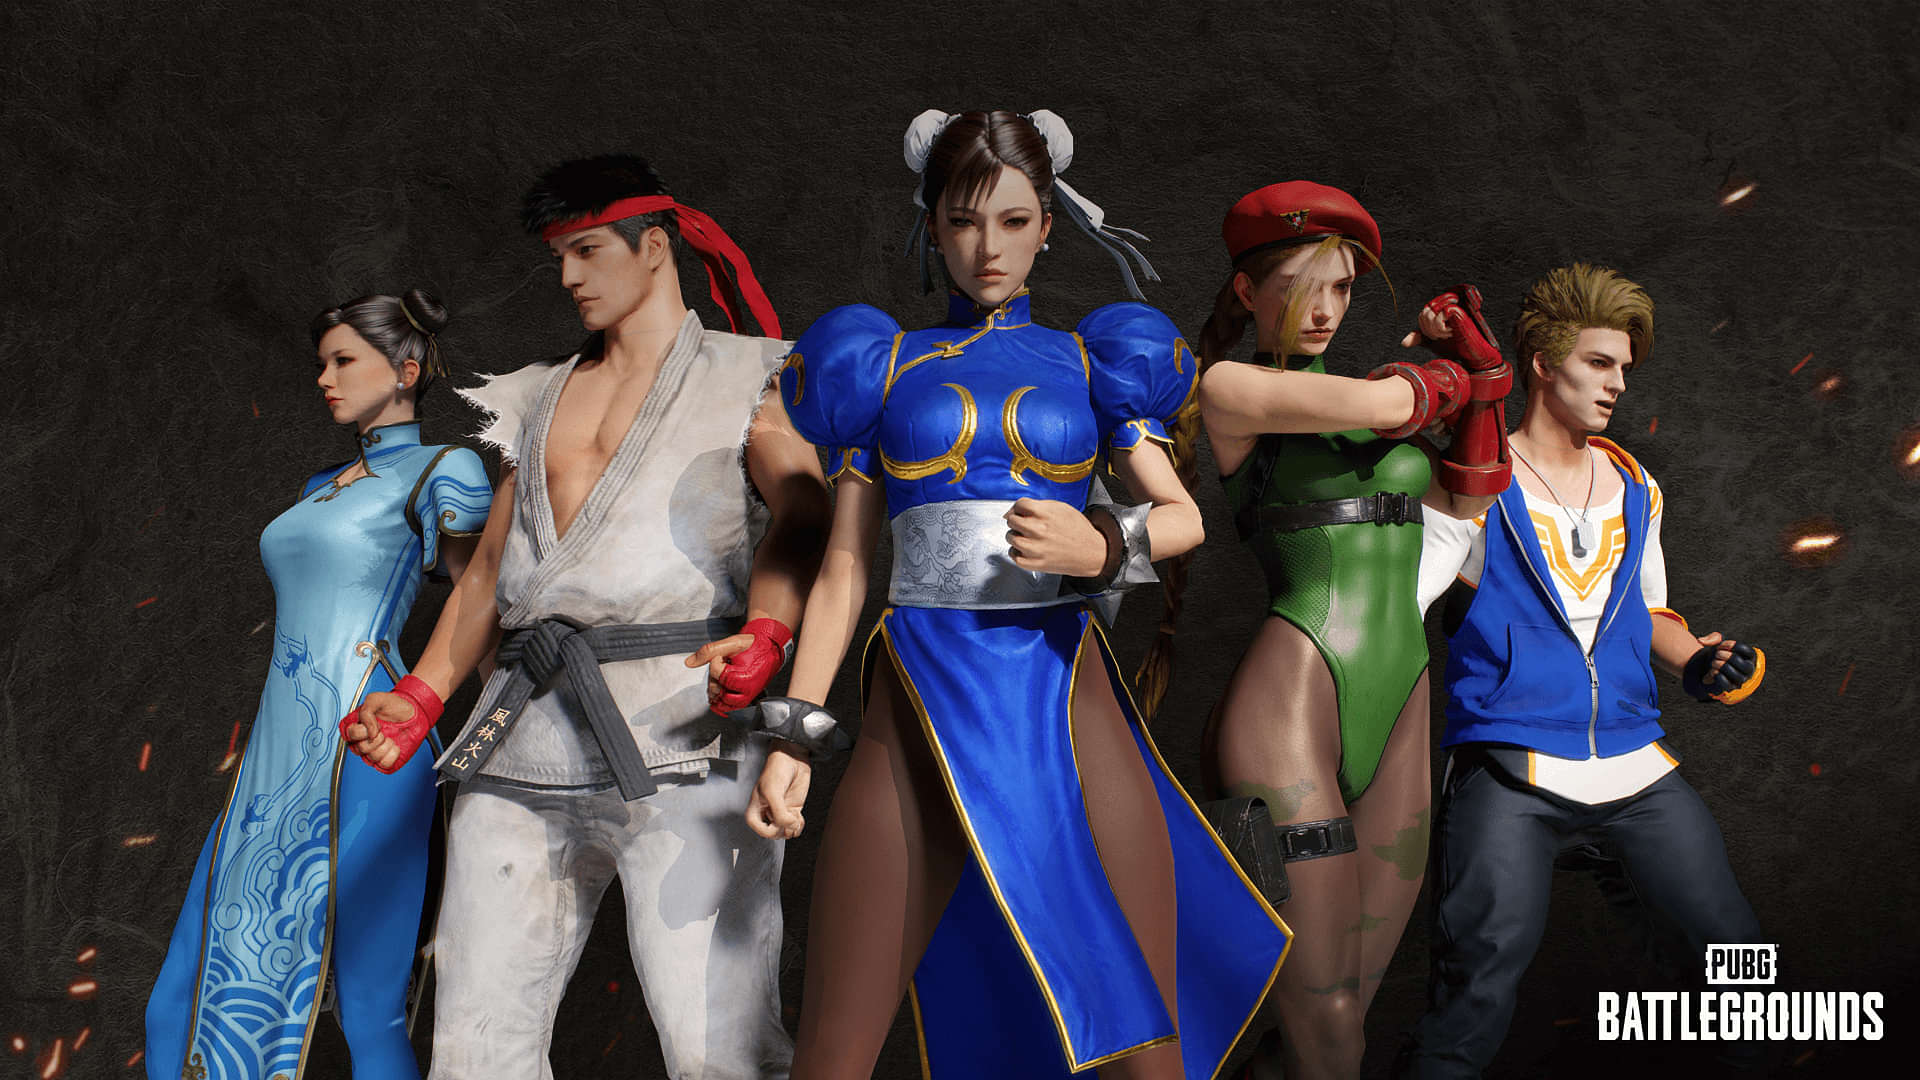 More classic Street Fighter characters are coming to Fortnite